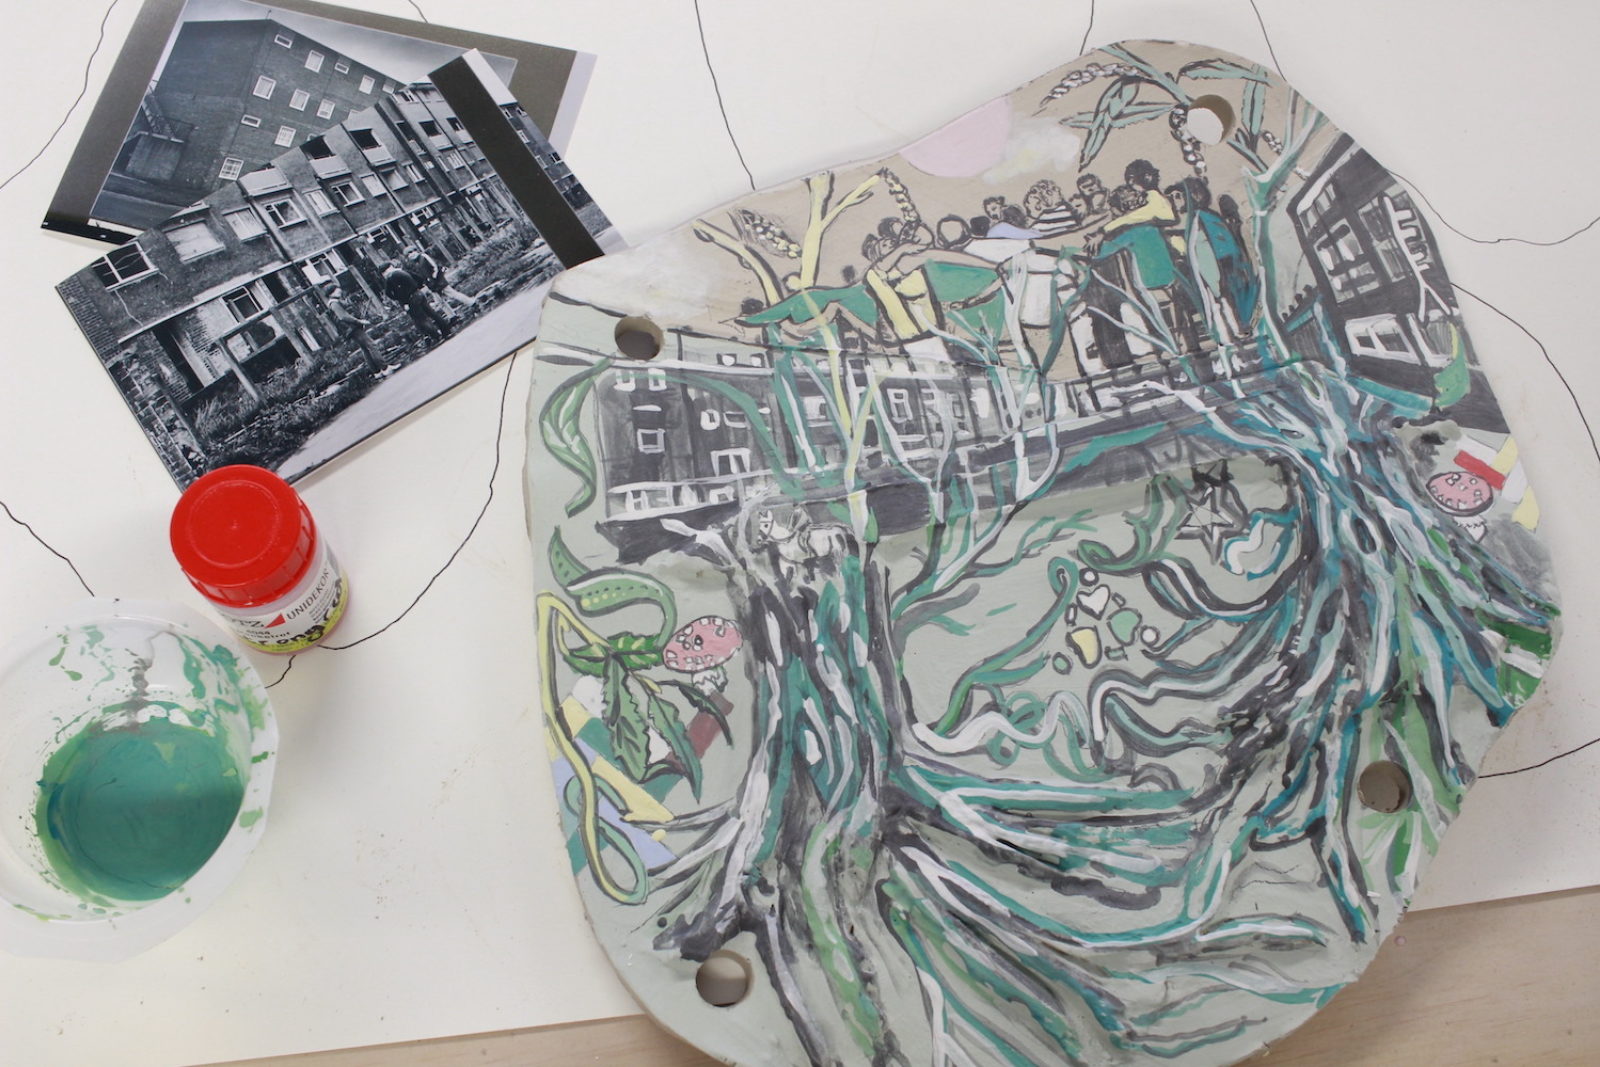 A photograph of one of Fran's artworks for the trail after having colour added to it. Next to it are some photographs of buildings.